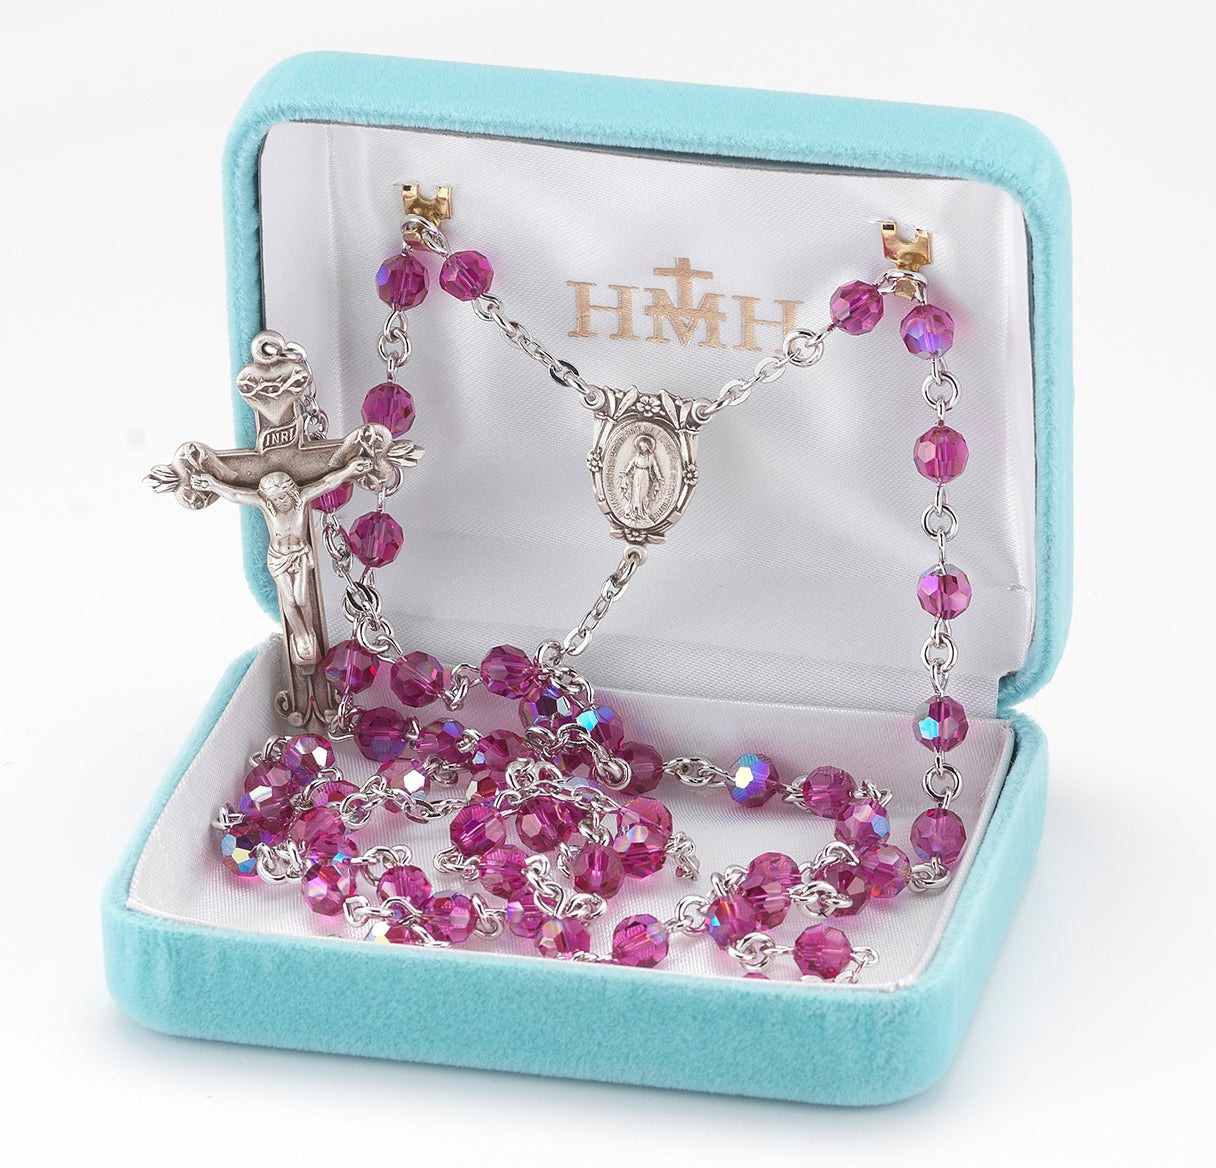 Rosary Sterling Crucifix and Centerpiece Created with Swarovski Crystal 6mm Faceted Round Fuchsia Beads by HMH